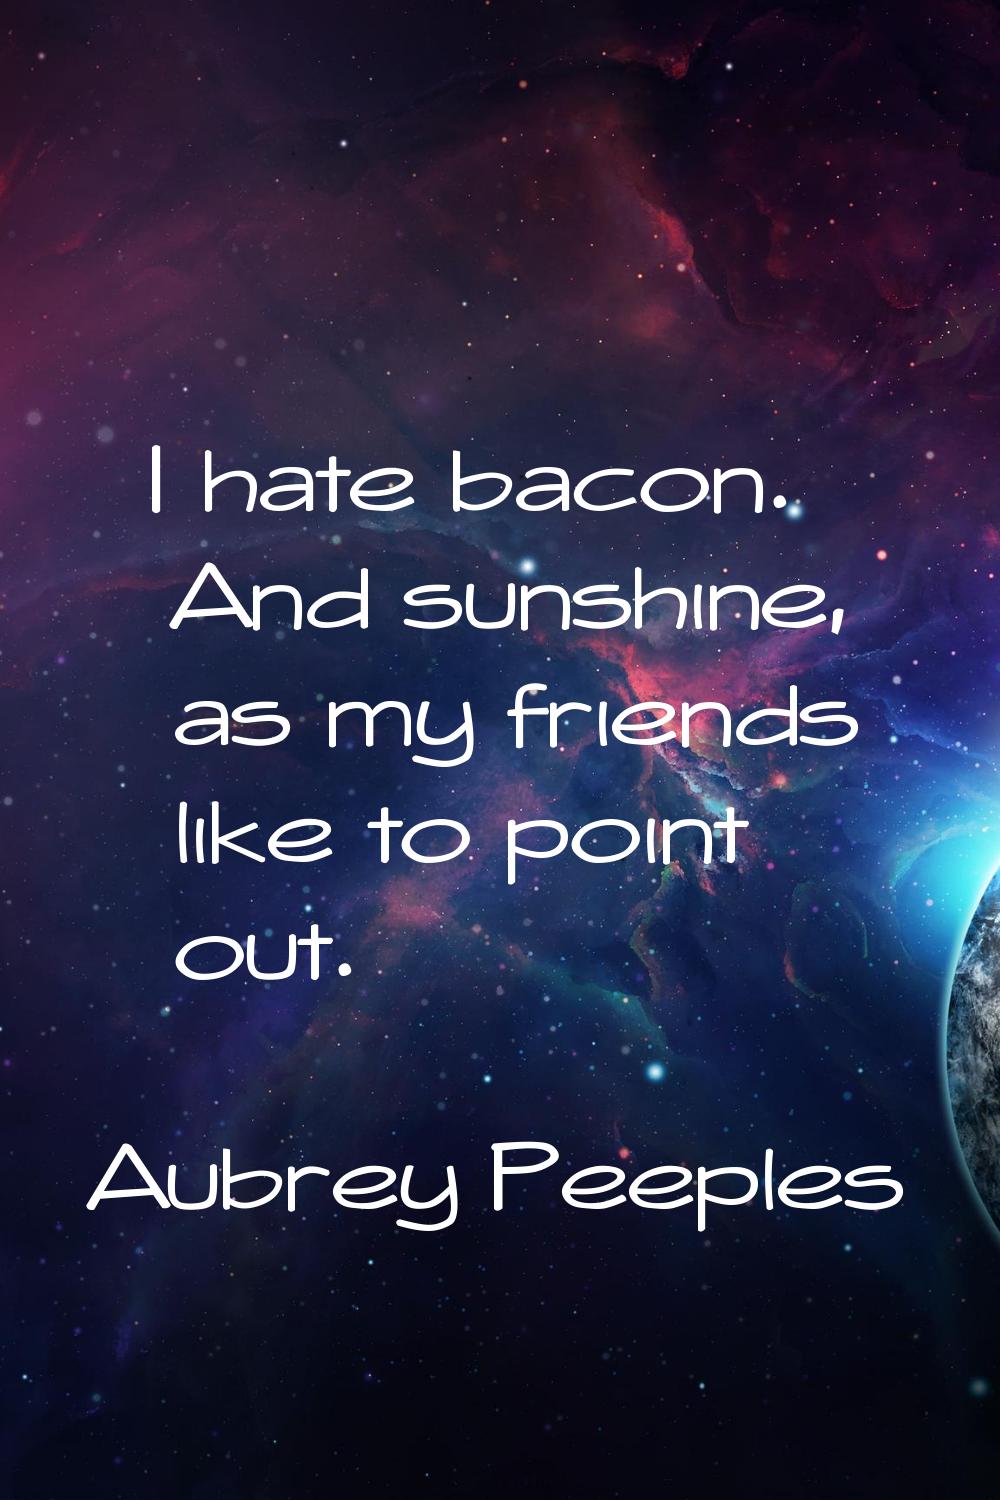 I hate bacon. And sunshine, as my friends like to point out.